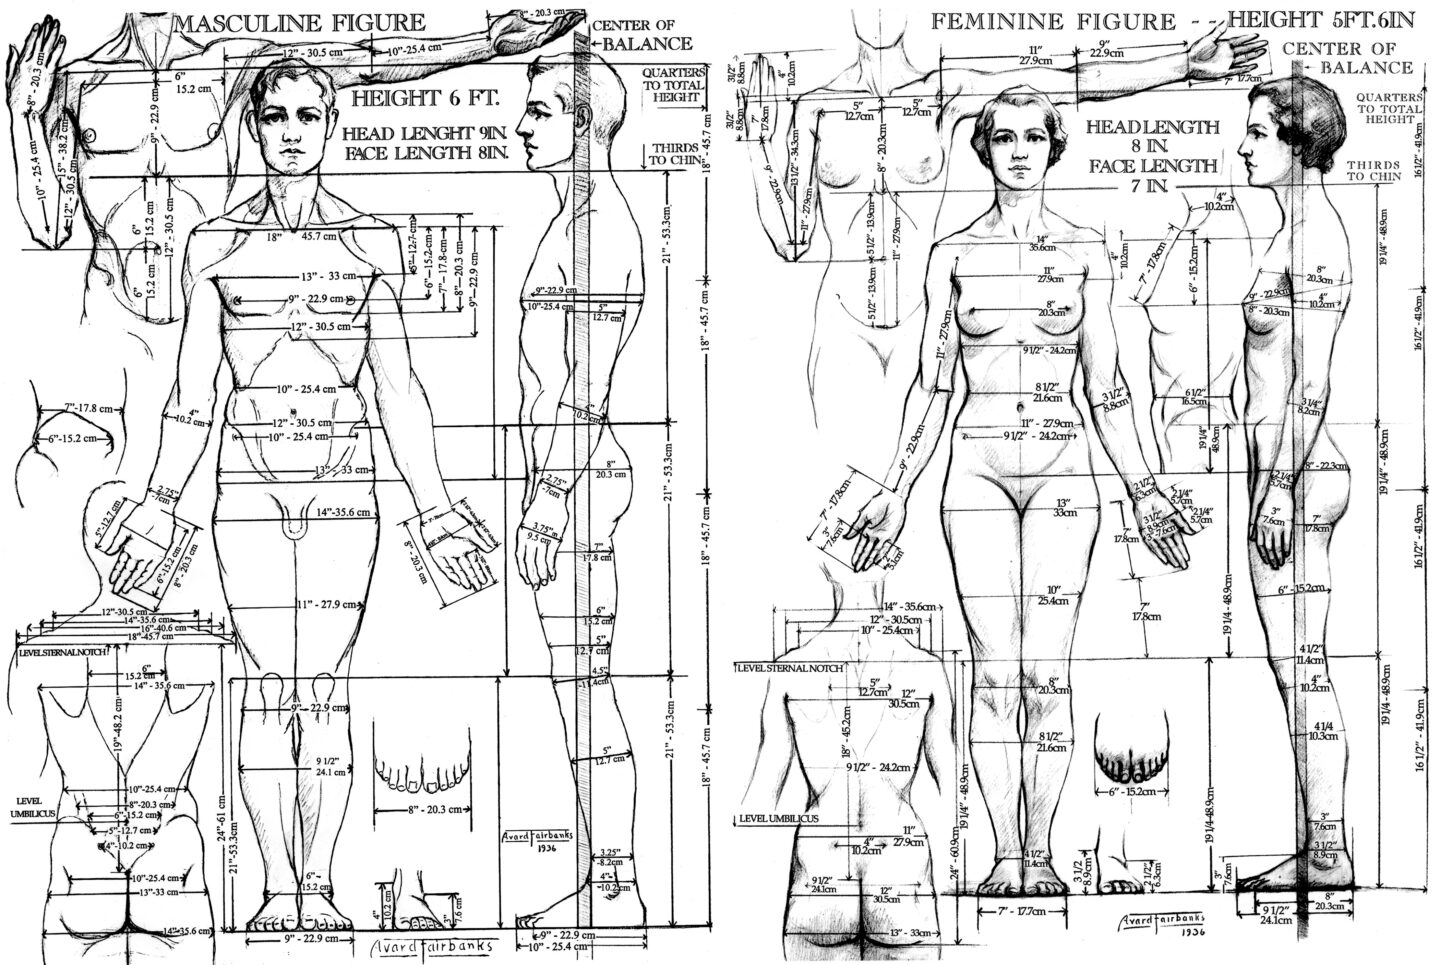 Drawing of proportions of the male and female figure 1936